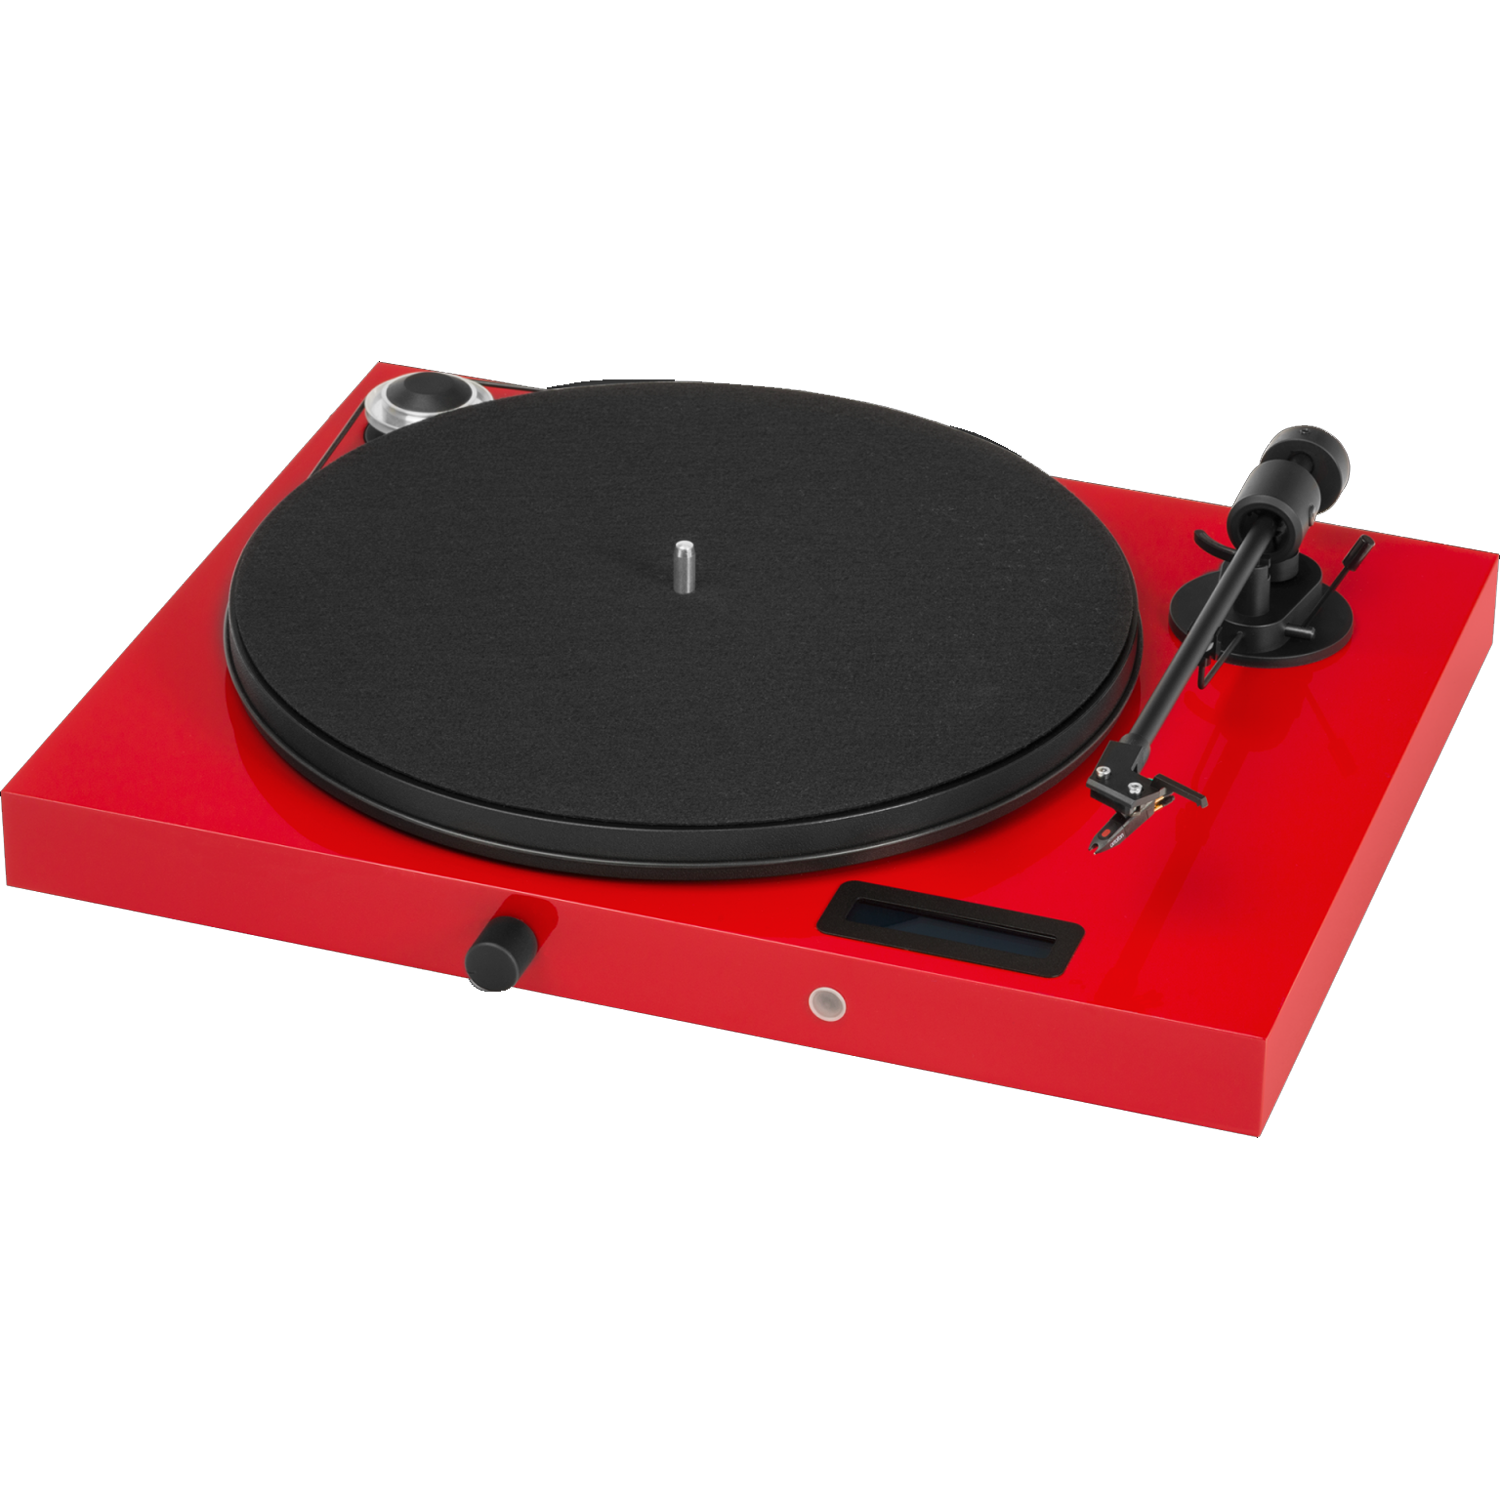 PRO-JECT NEW Juke Box E Audiophile Turntable, Amp, BT, just add speakers, RED